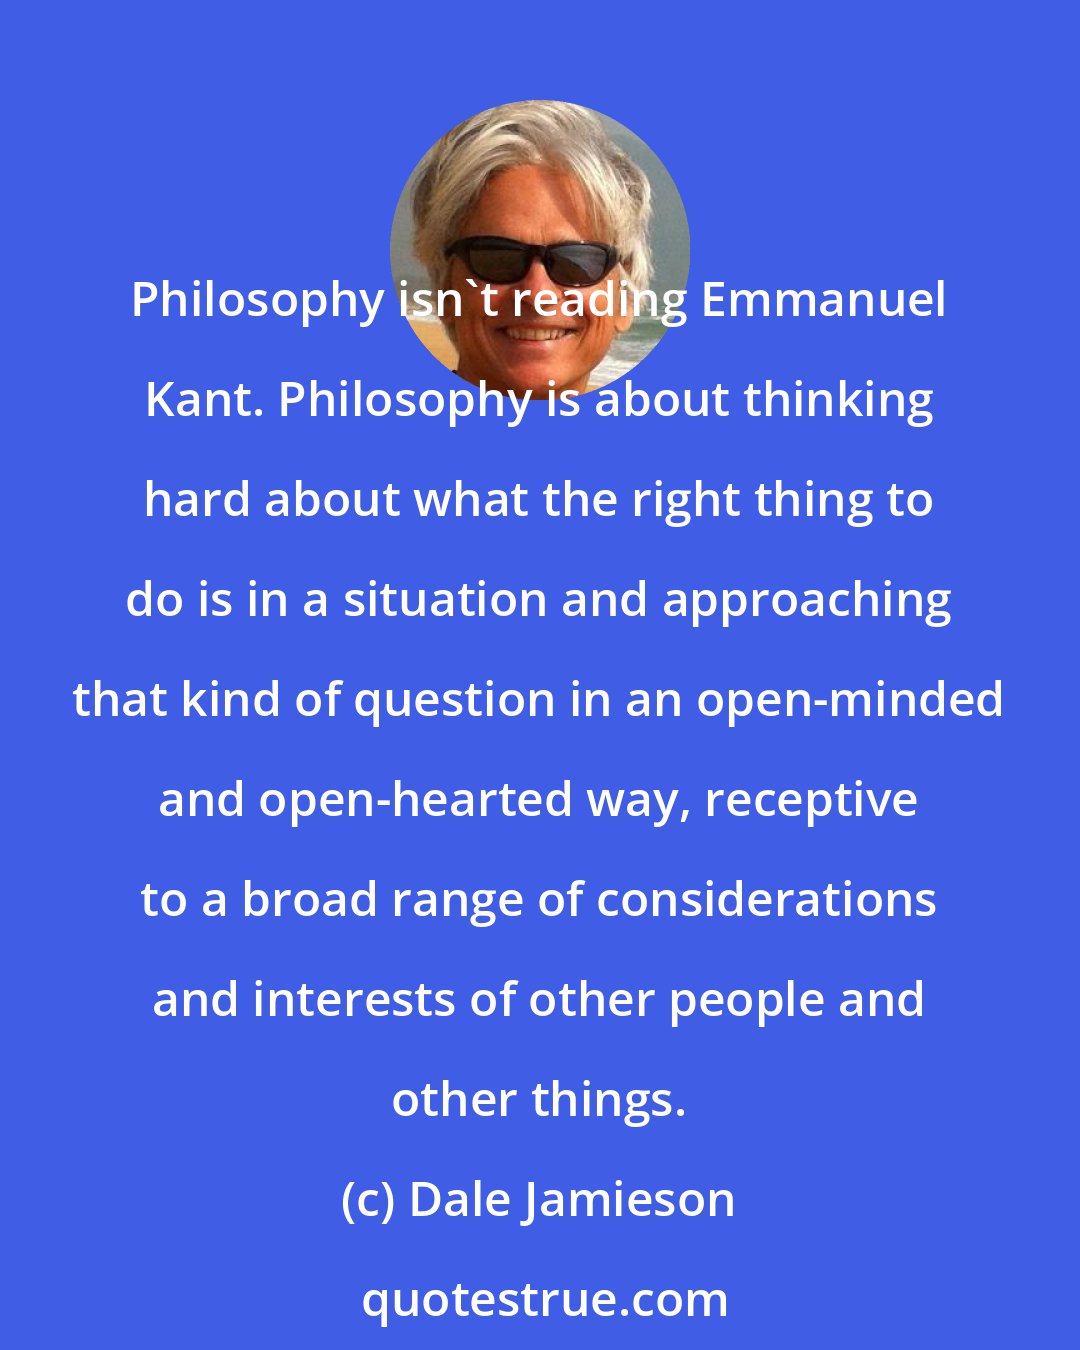 Dale Jamieson: Philosophy isn't reading Emmanuel Kant. Philosophy is about thinking hard about what the right thing to do is in a situation and approaching that kind of question in an open-minded and open-hearted way, receptive to a broad range of considerations and interests of other people and other things.